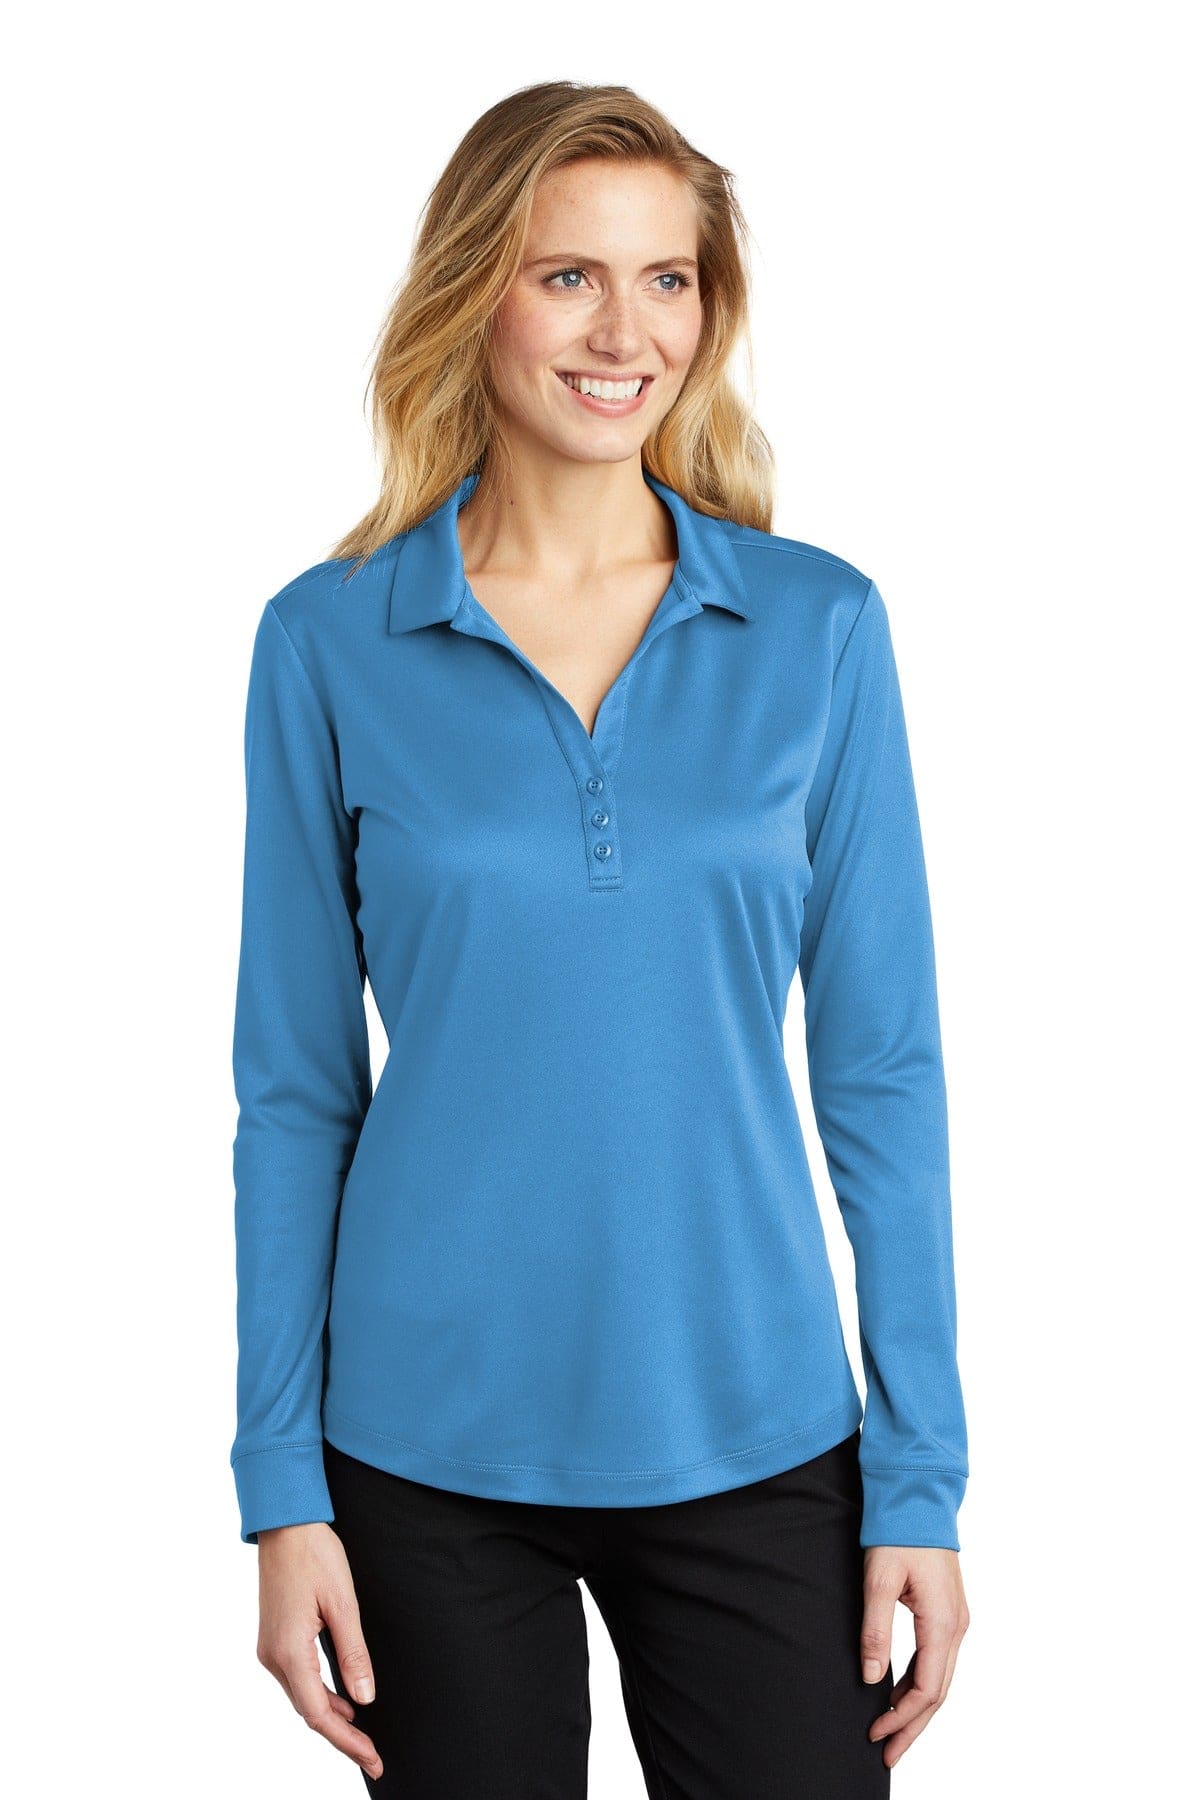 Port Authority Ladies Silk Touch ’ Performance Long Sleeve Polo. L540ls